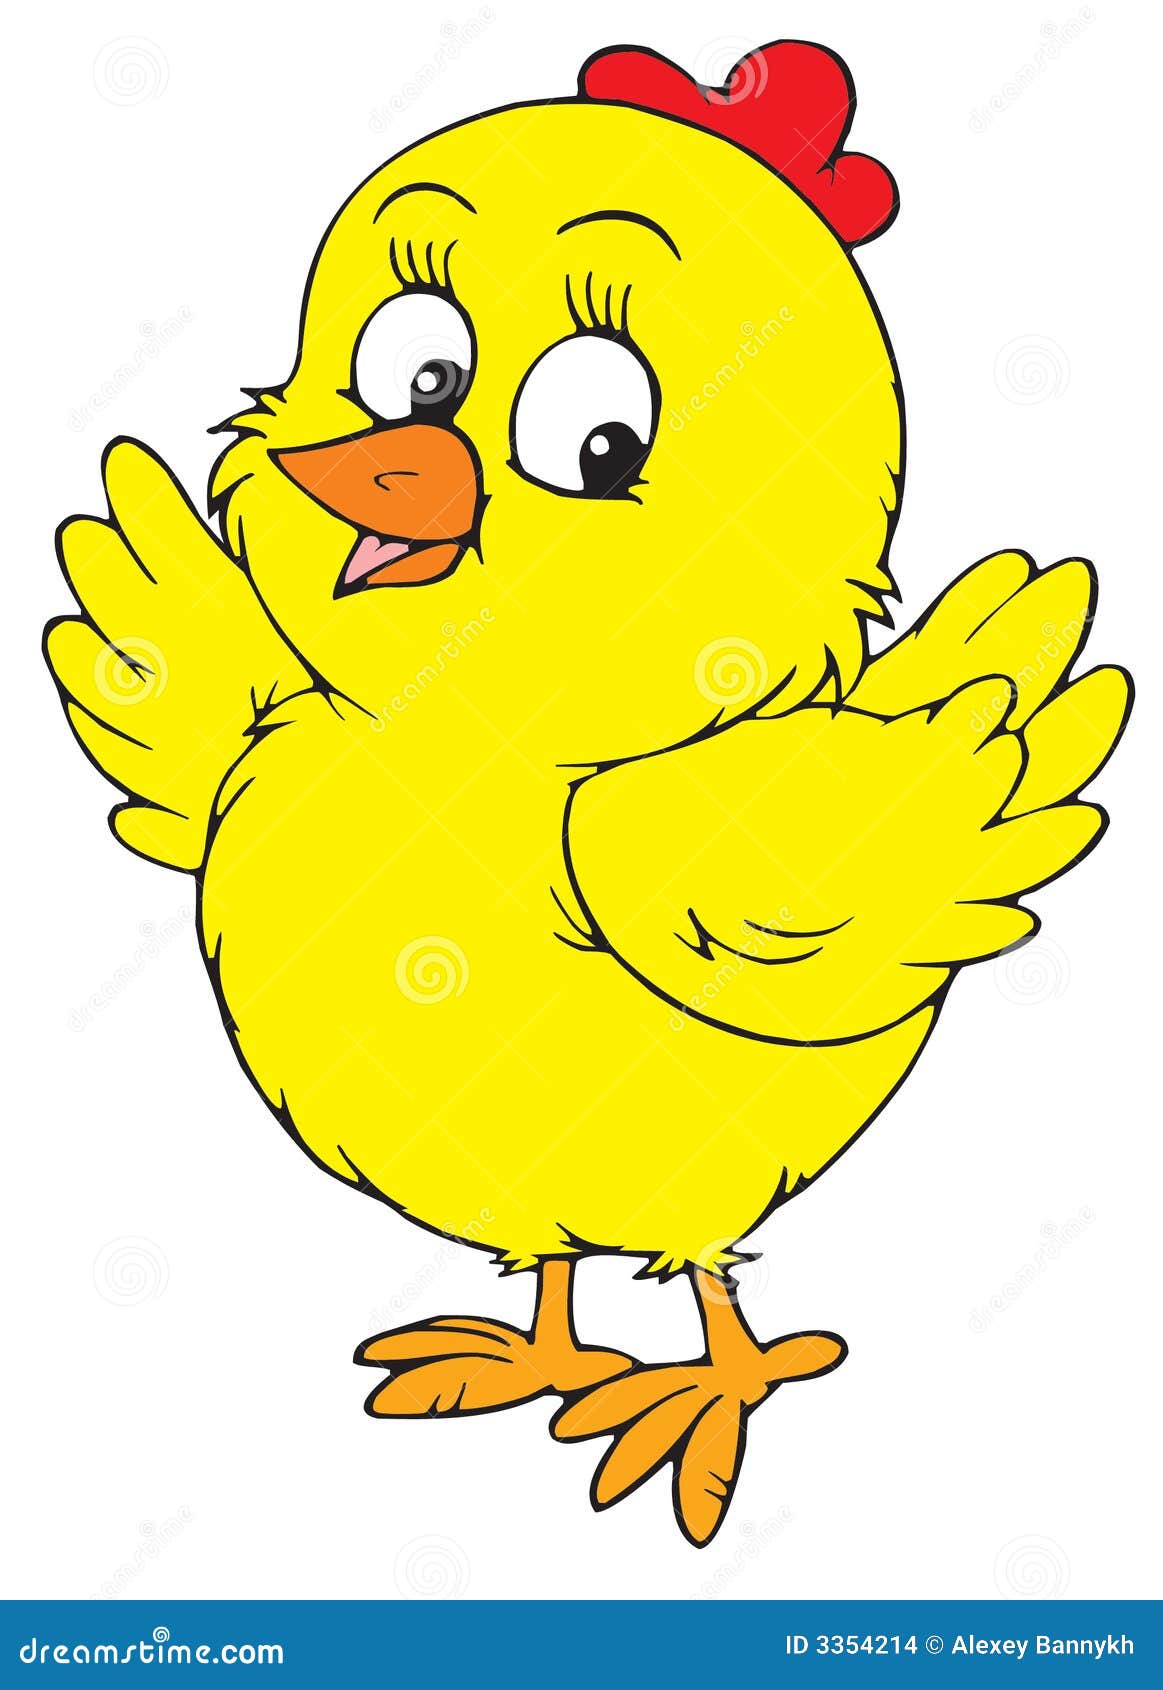 clipart chicken and chicks - photo #38